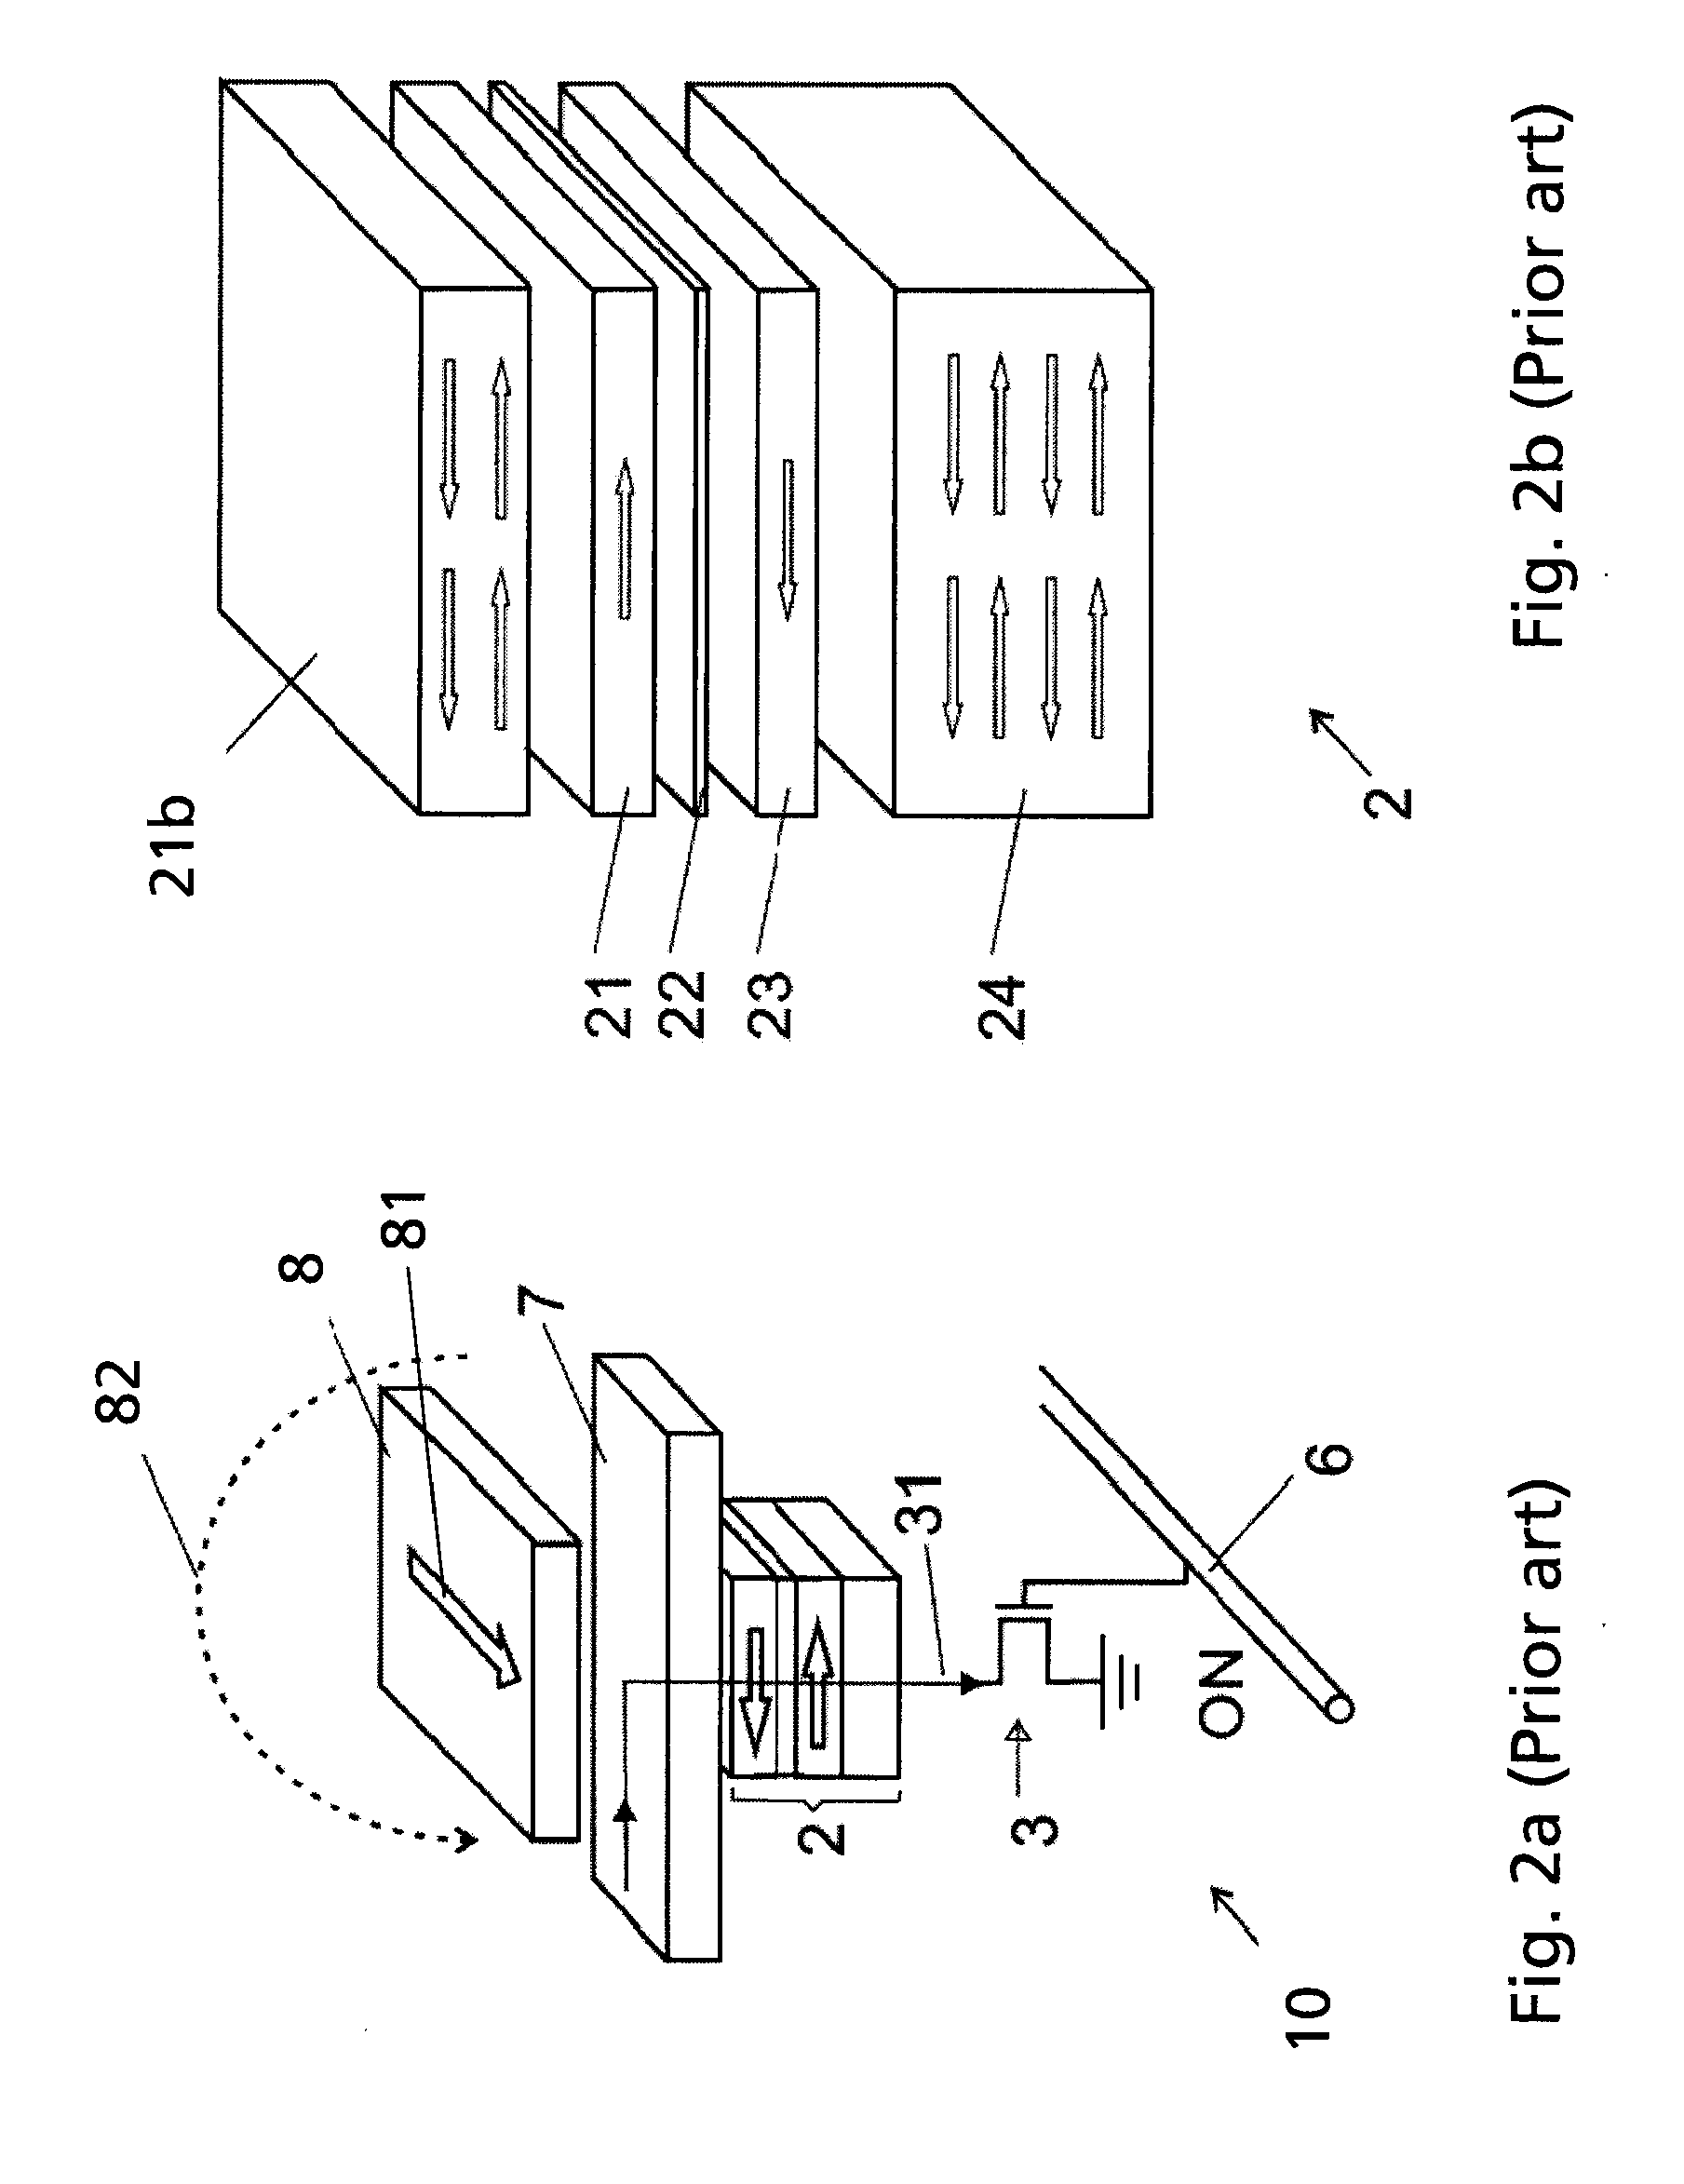 Magnetic memory with a thermally assisted writing procedure and reduced writing field